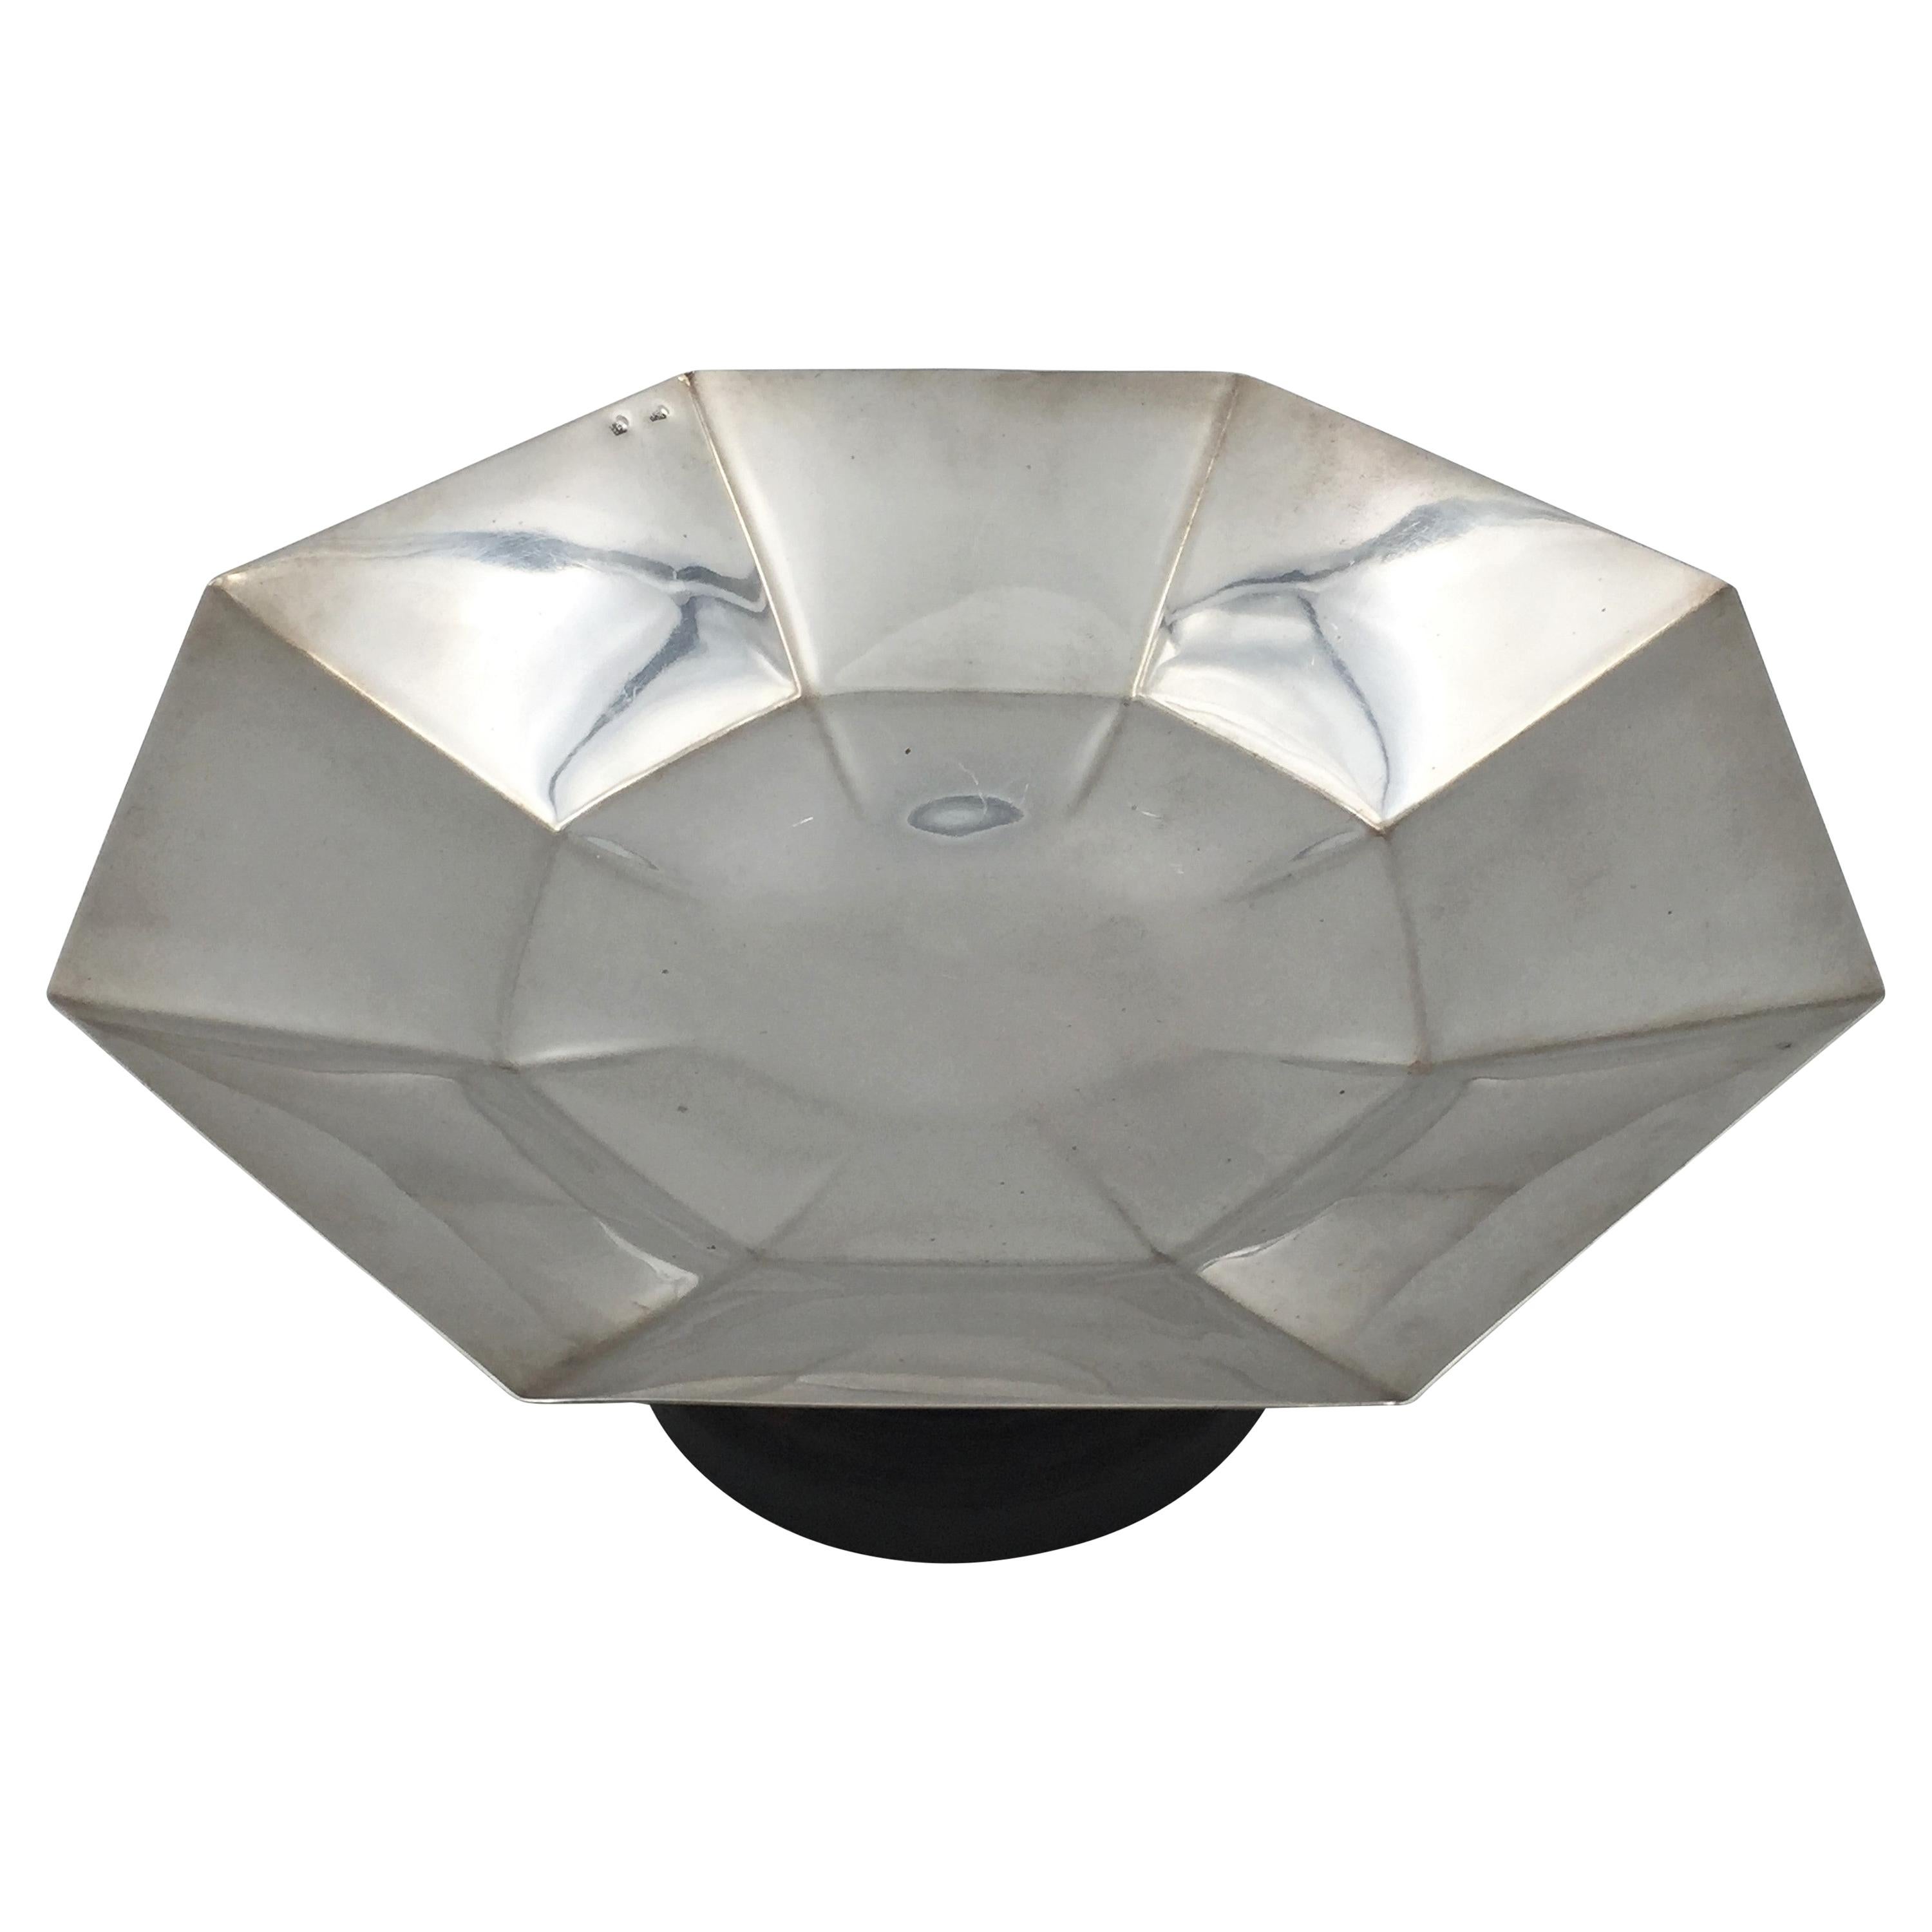 Central European, continental 0.800 silver, octogonally-shaped, centerpiece stand bowl in Mid-Century Modern style in exquisite geometric design, standing on a wood base. It measures 8 1/2'' in diameter by 3 7/8'' in height, weighs 15.9 ozt, and